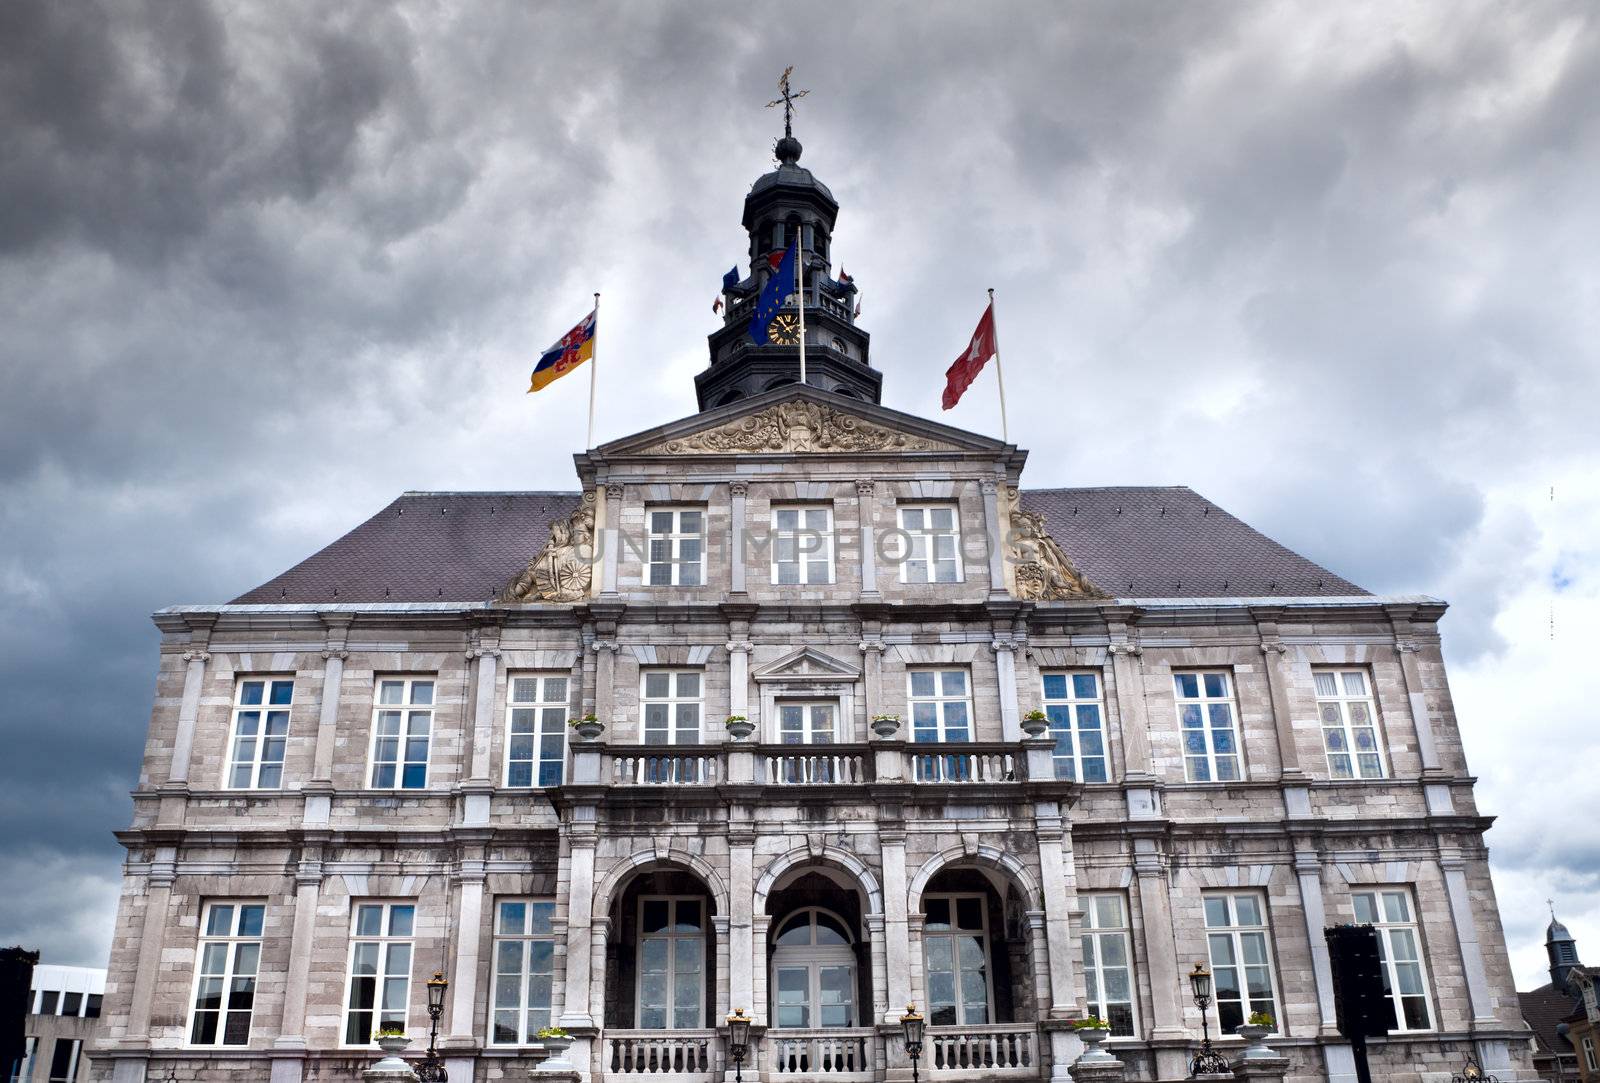 City Hall in Maastricht in Netherlands